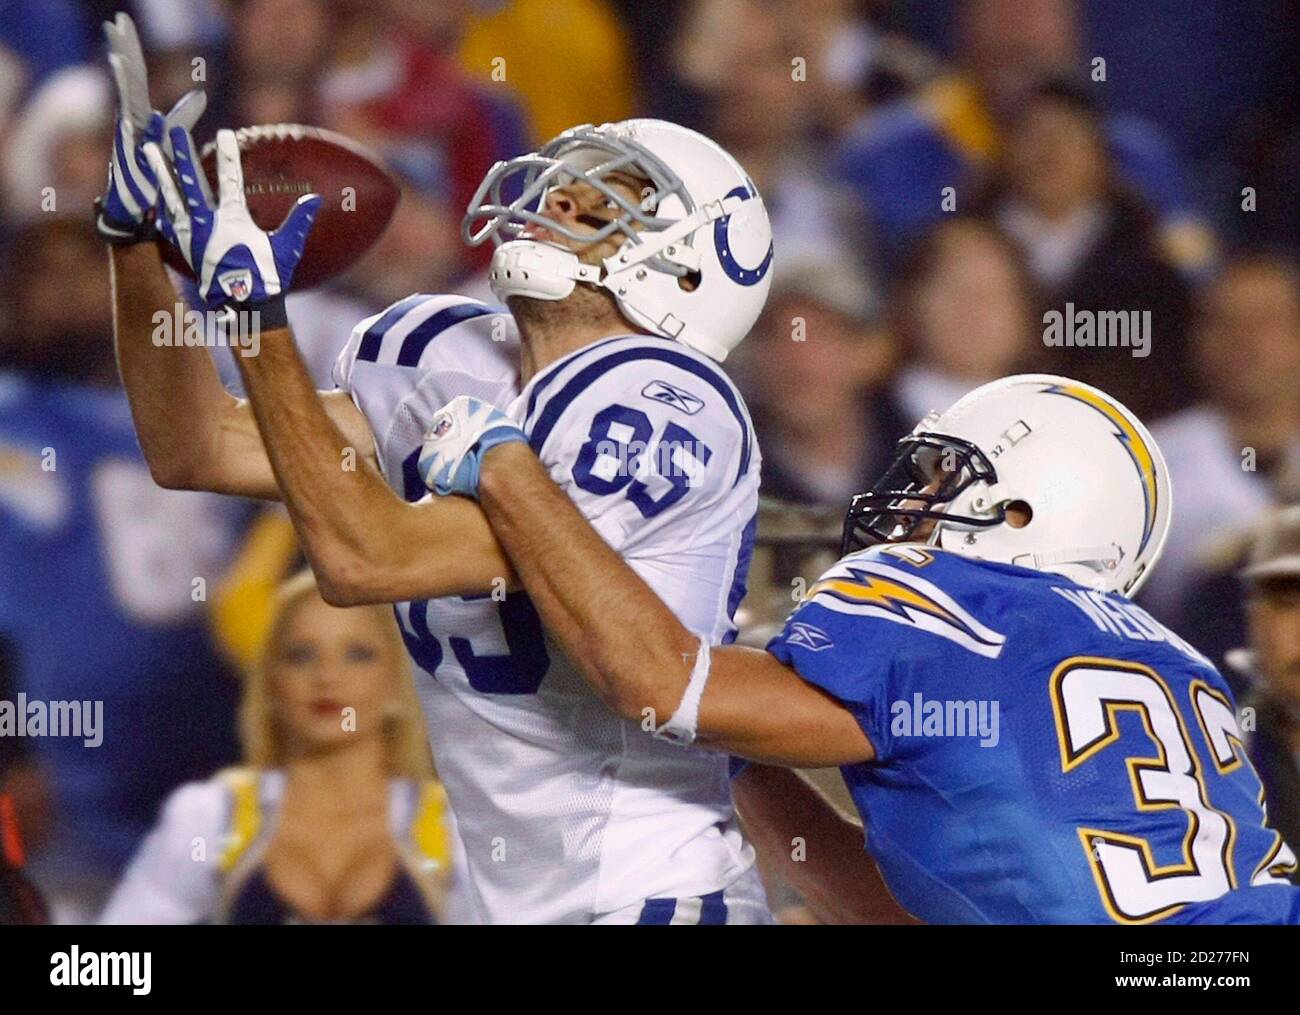 San Diego Chargers' Eric Weddle (R) breaks up a pass to Indianapolis Colts' Aaron Moorehead during their National Football League game in San Diego, November 11, 2007.   REUTERS/Mike Blake      (UNITED STATES) Stock Photo